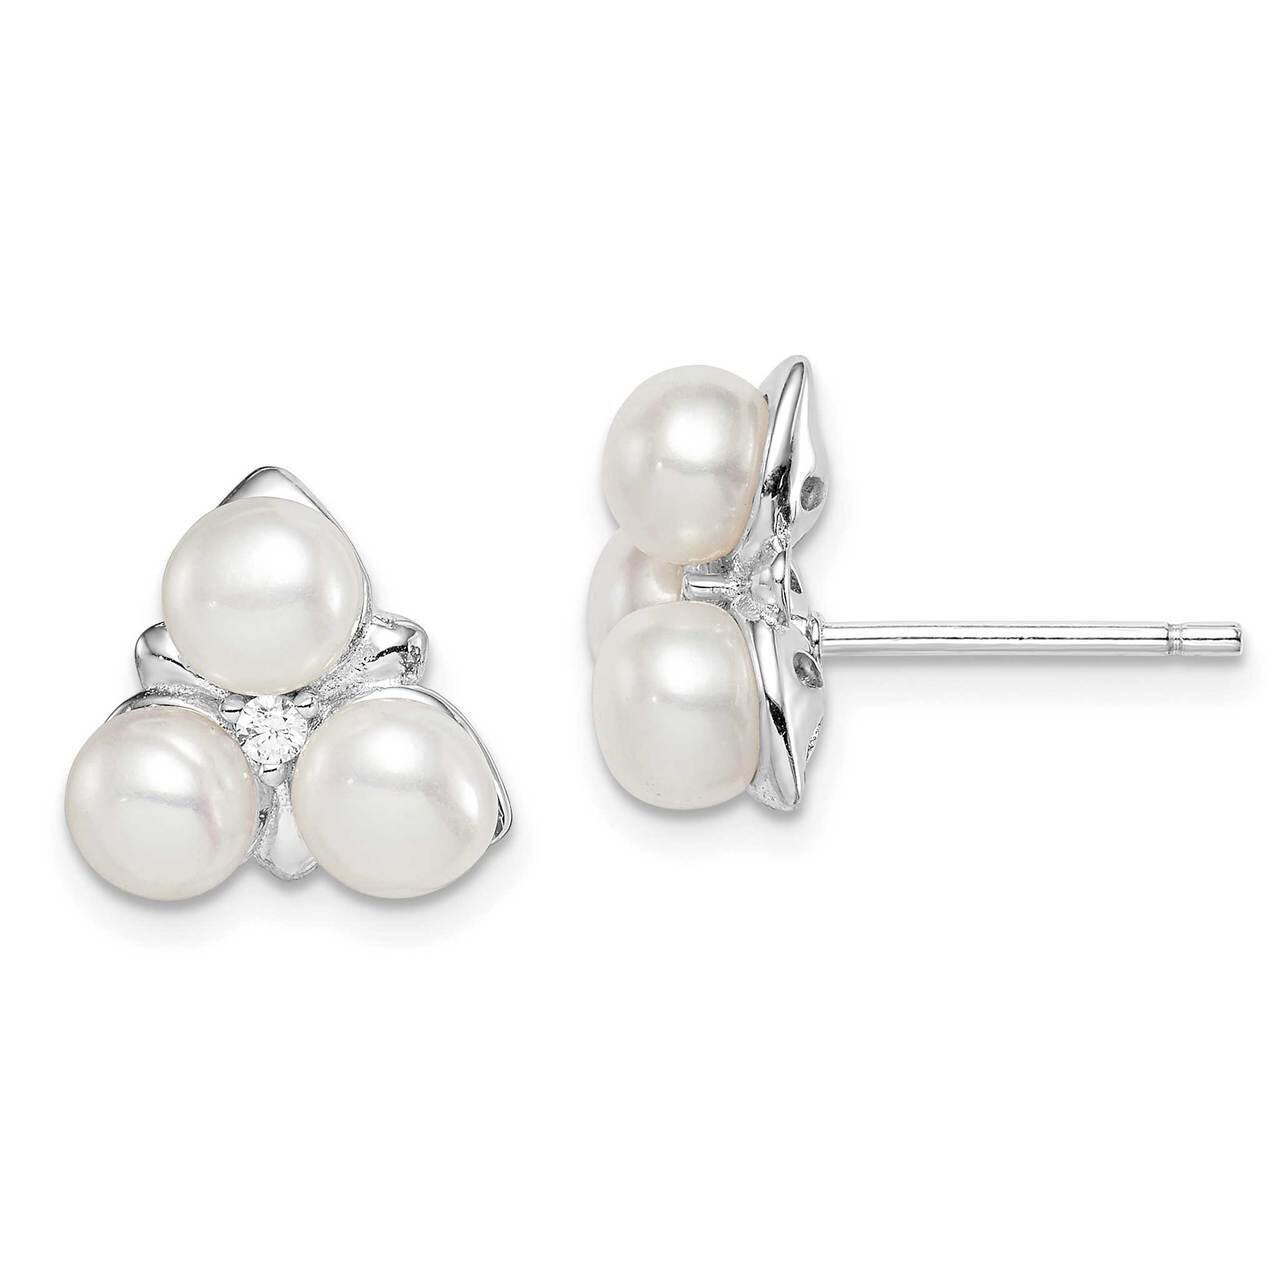 White Freshwater Cultured 3-Pearl CZ Diamond Post Earrings Sterling Silver Rhodium Plated QE15343